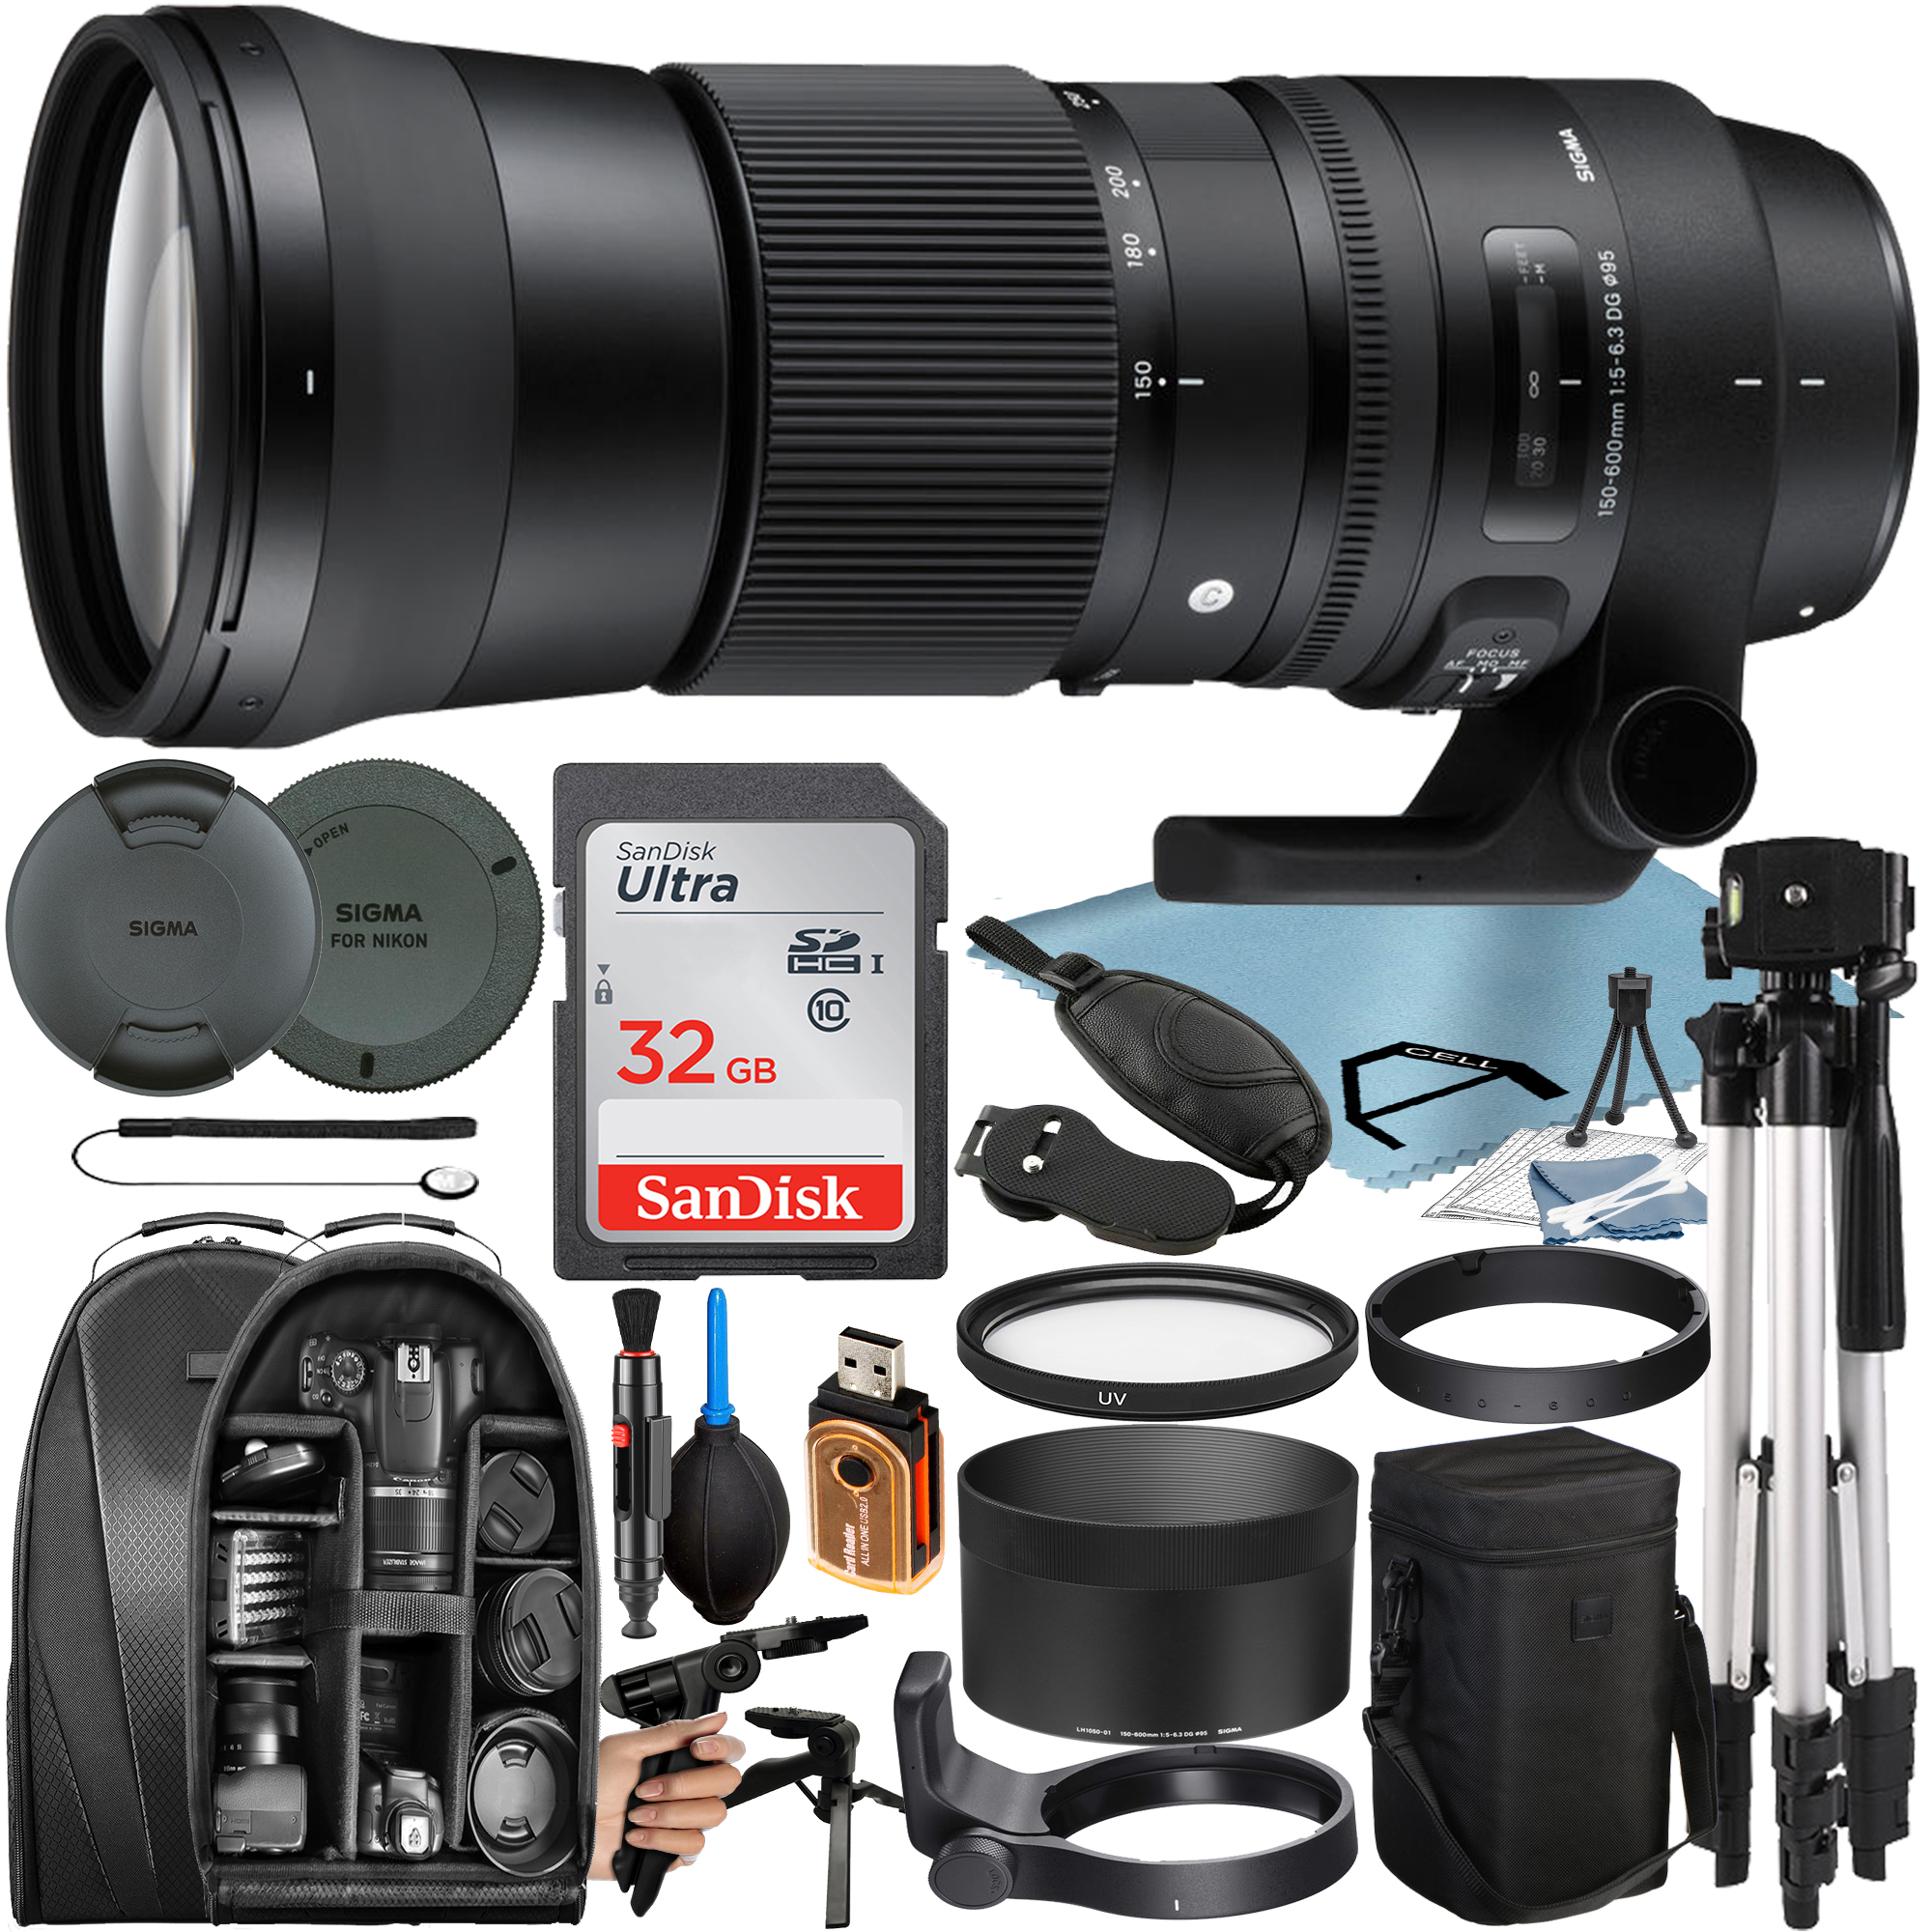 Sigma 150-600mm F/5-6.3 DG OS HSM Contemporary Lens for Nikon F with 32GB SanDisk Memory Card + Tripod + Backpack + A-Cell Accessory Bundle